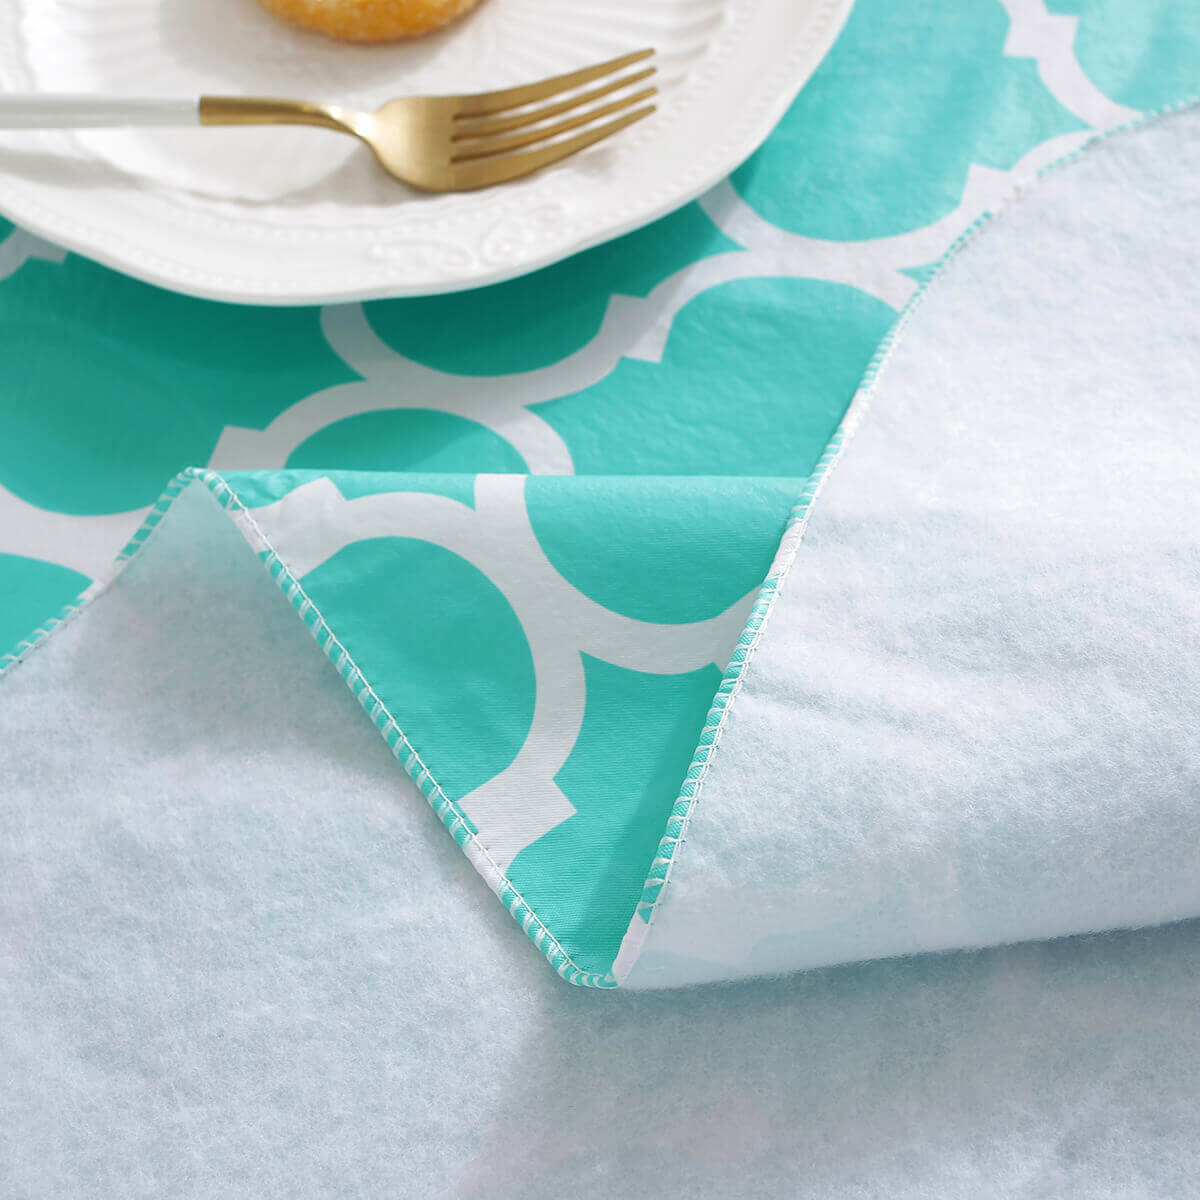 SASTYBALE vinyl tablecloth with flannel backing blue